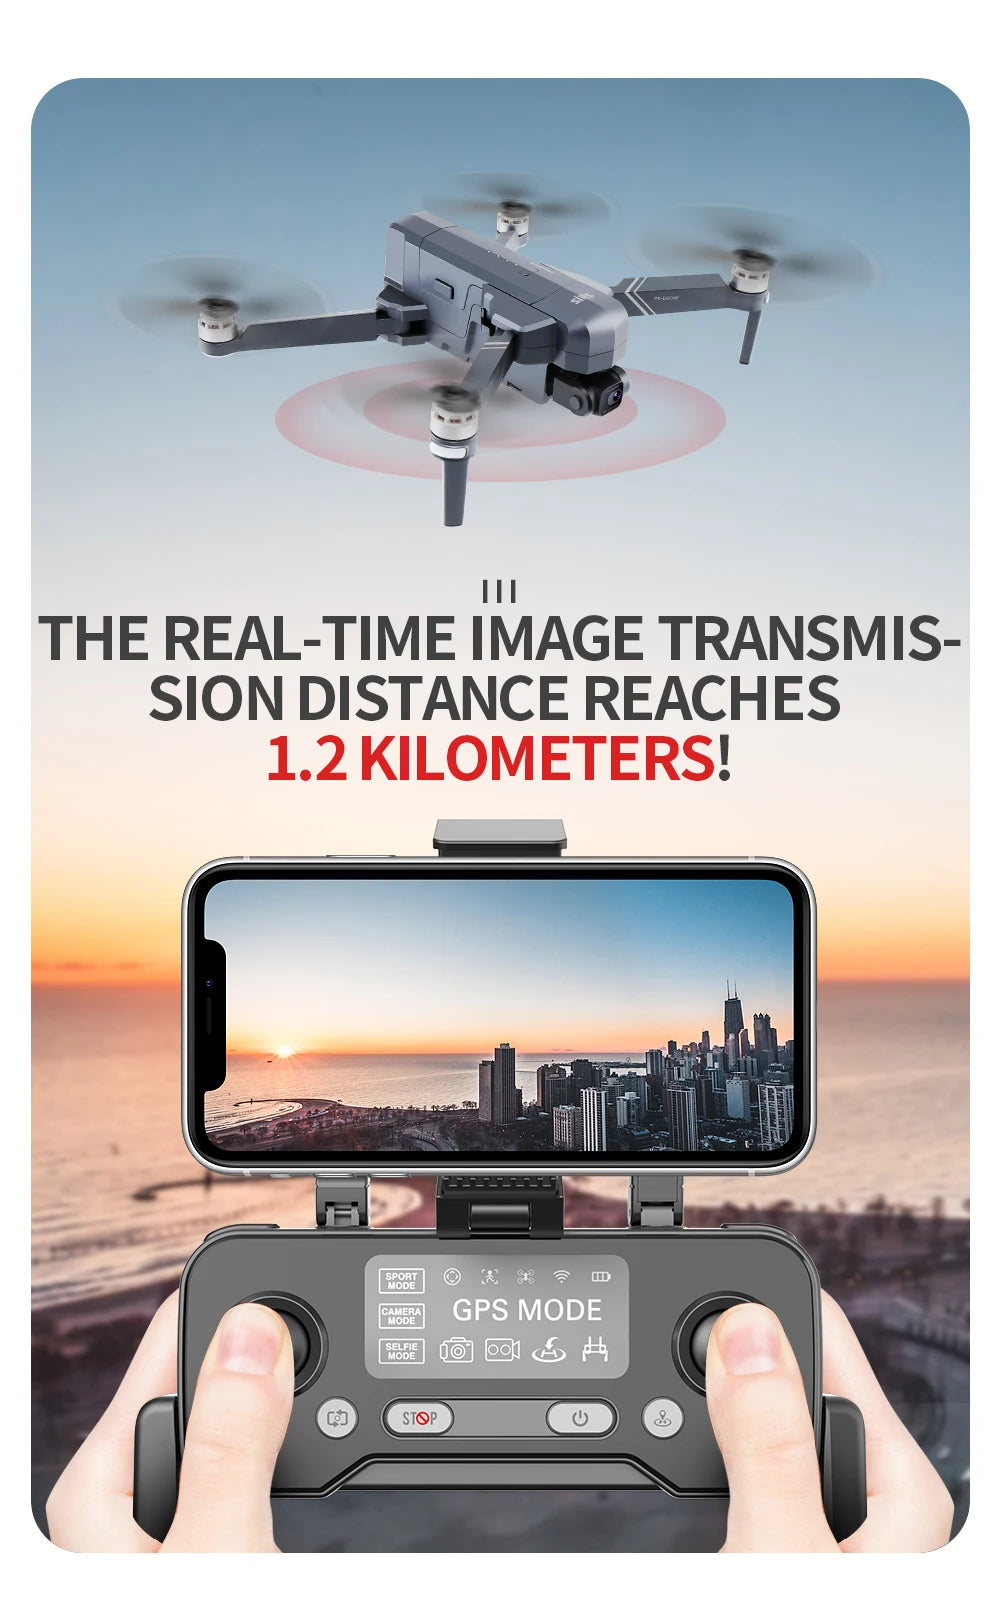 SJRC F11 / F11S  Pro Drone, THE REAL-TIME IMAGE TRANSMIS- SION DISTANCE REACHES